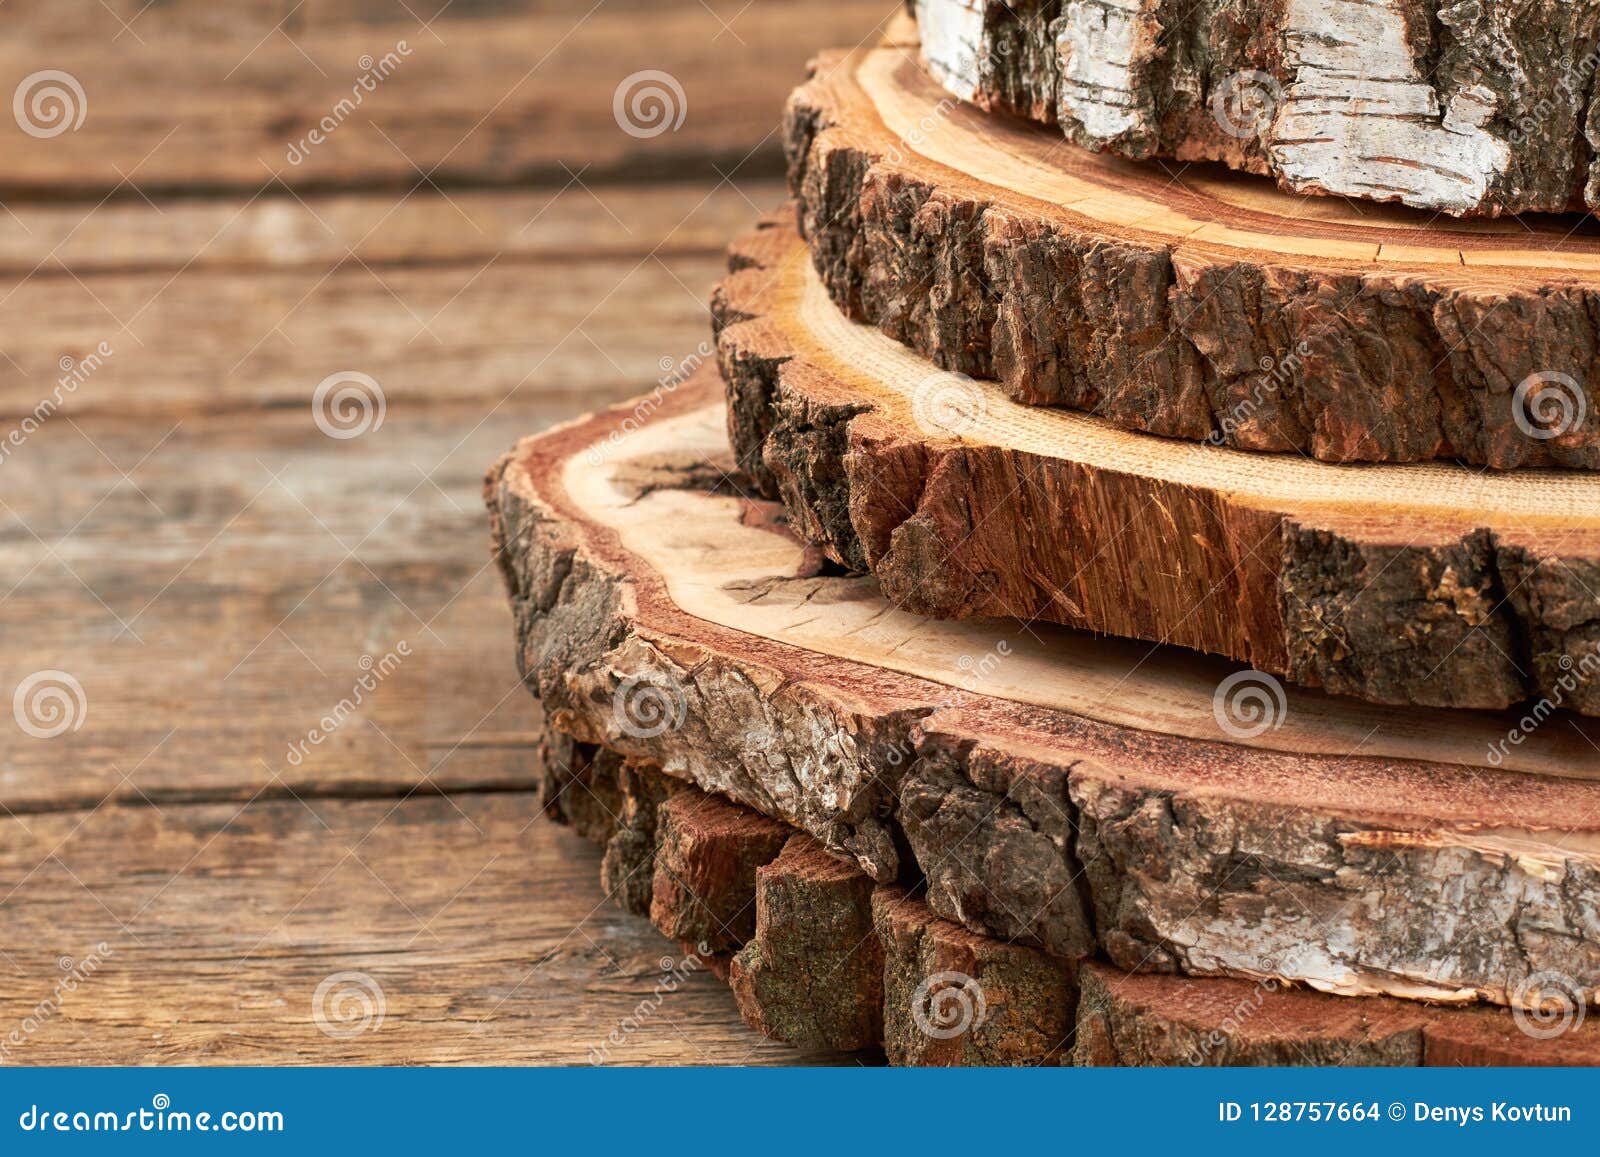 Natural Wood Log Slice Tree Bark Rustic Wedding Table Centerpiece Cake Stand 